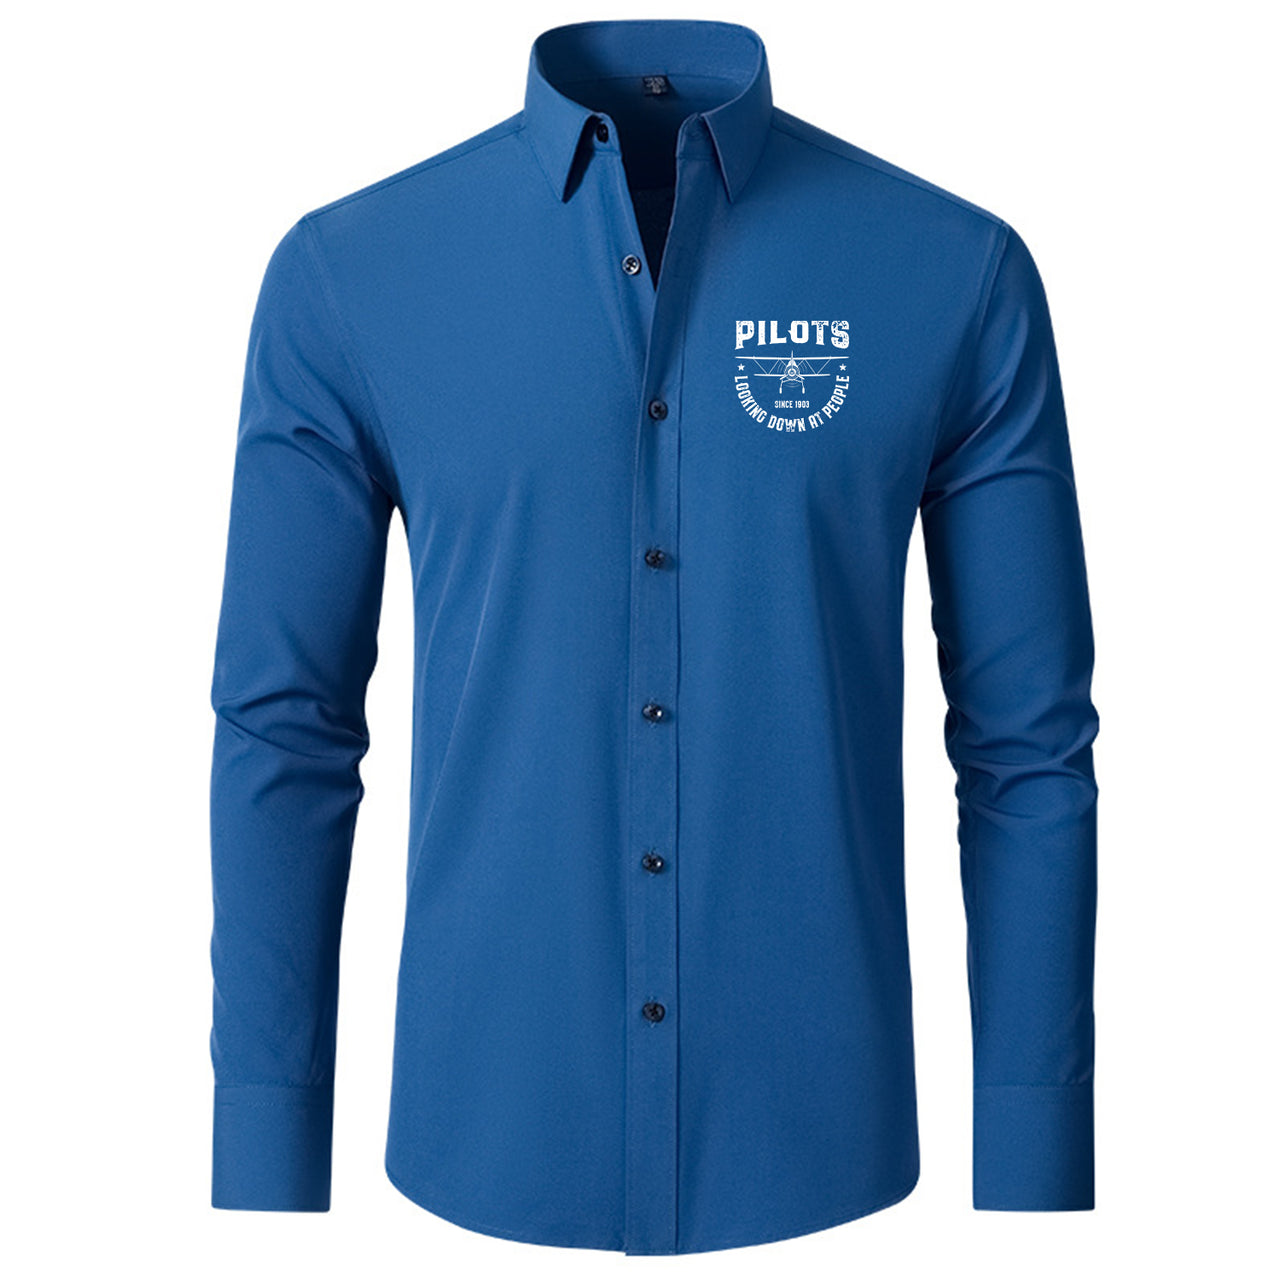 Pilots Looking Down at People Since 1903 Designed Long Sleeve Shirts